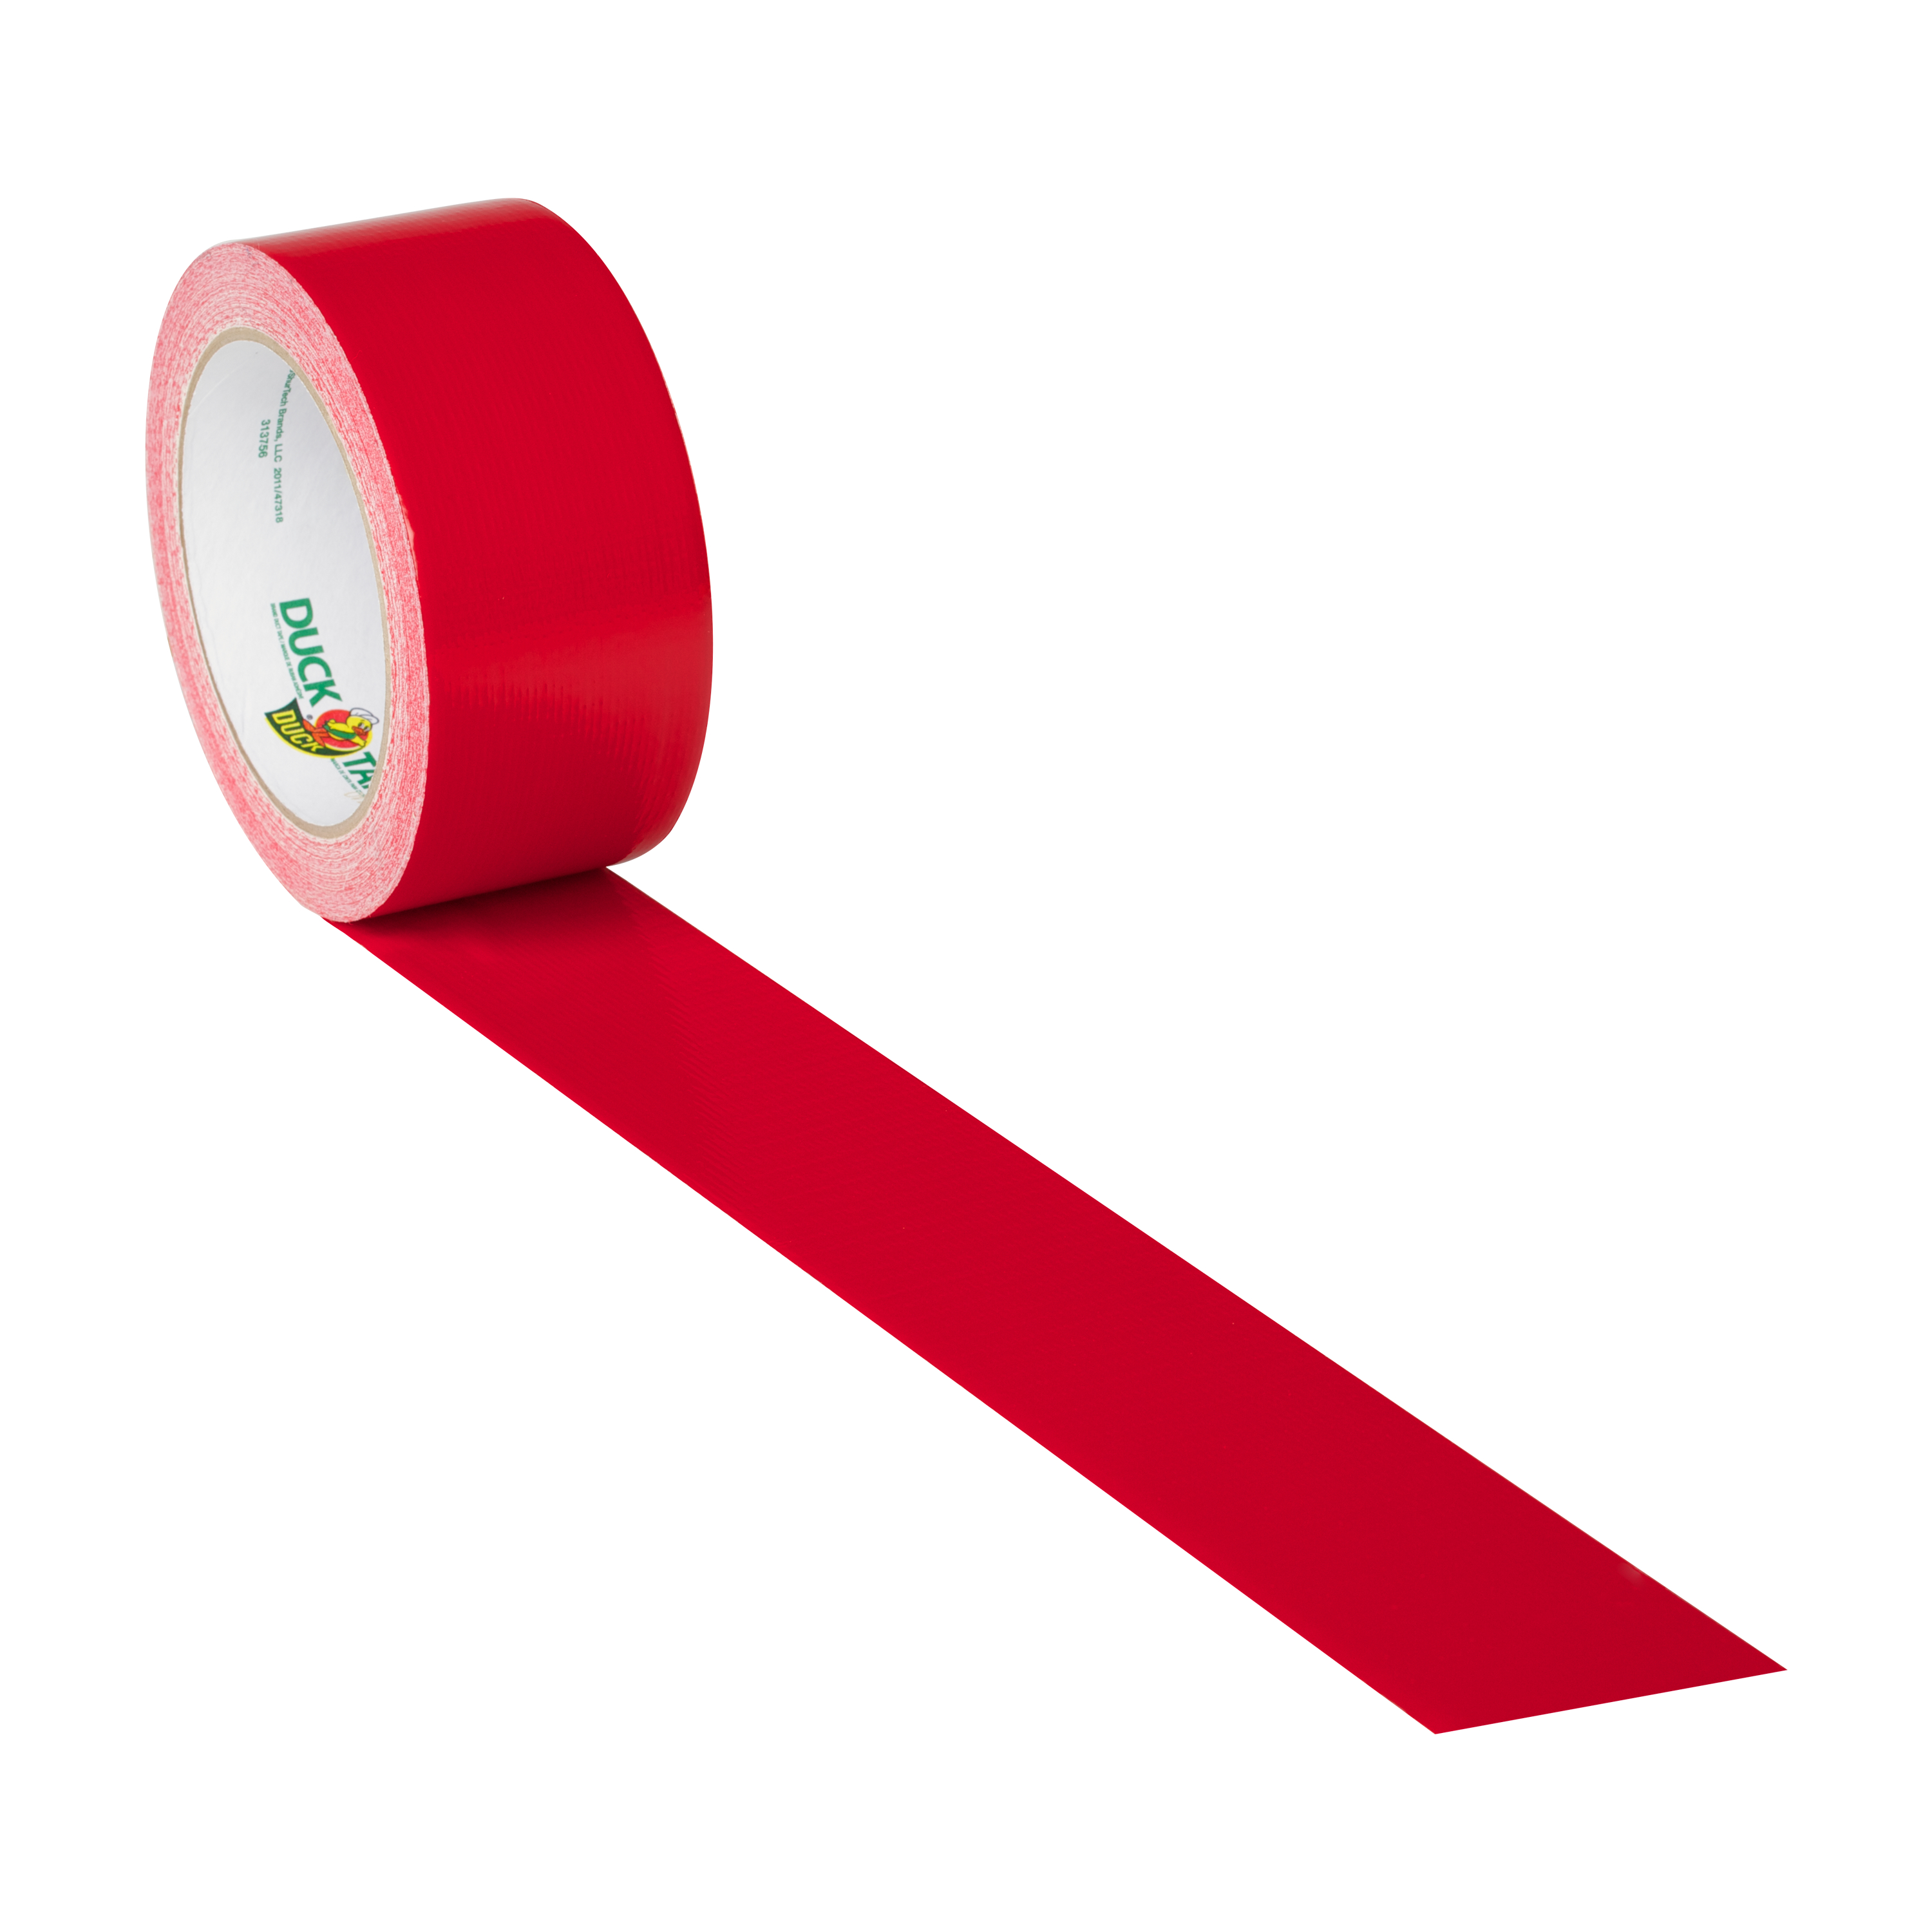 Duck Brand Color Duct Tape, 1.88 in. x 20 yd., Red - image 3 of 5